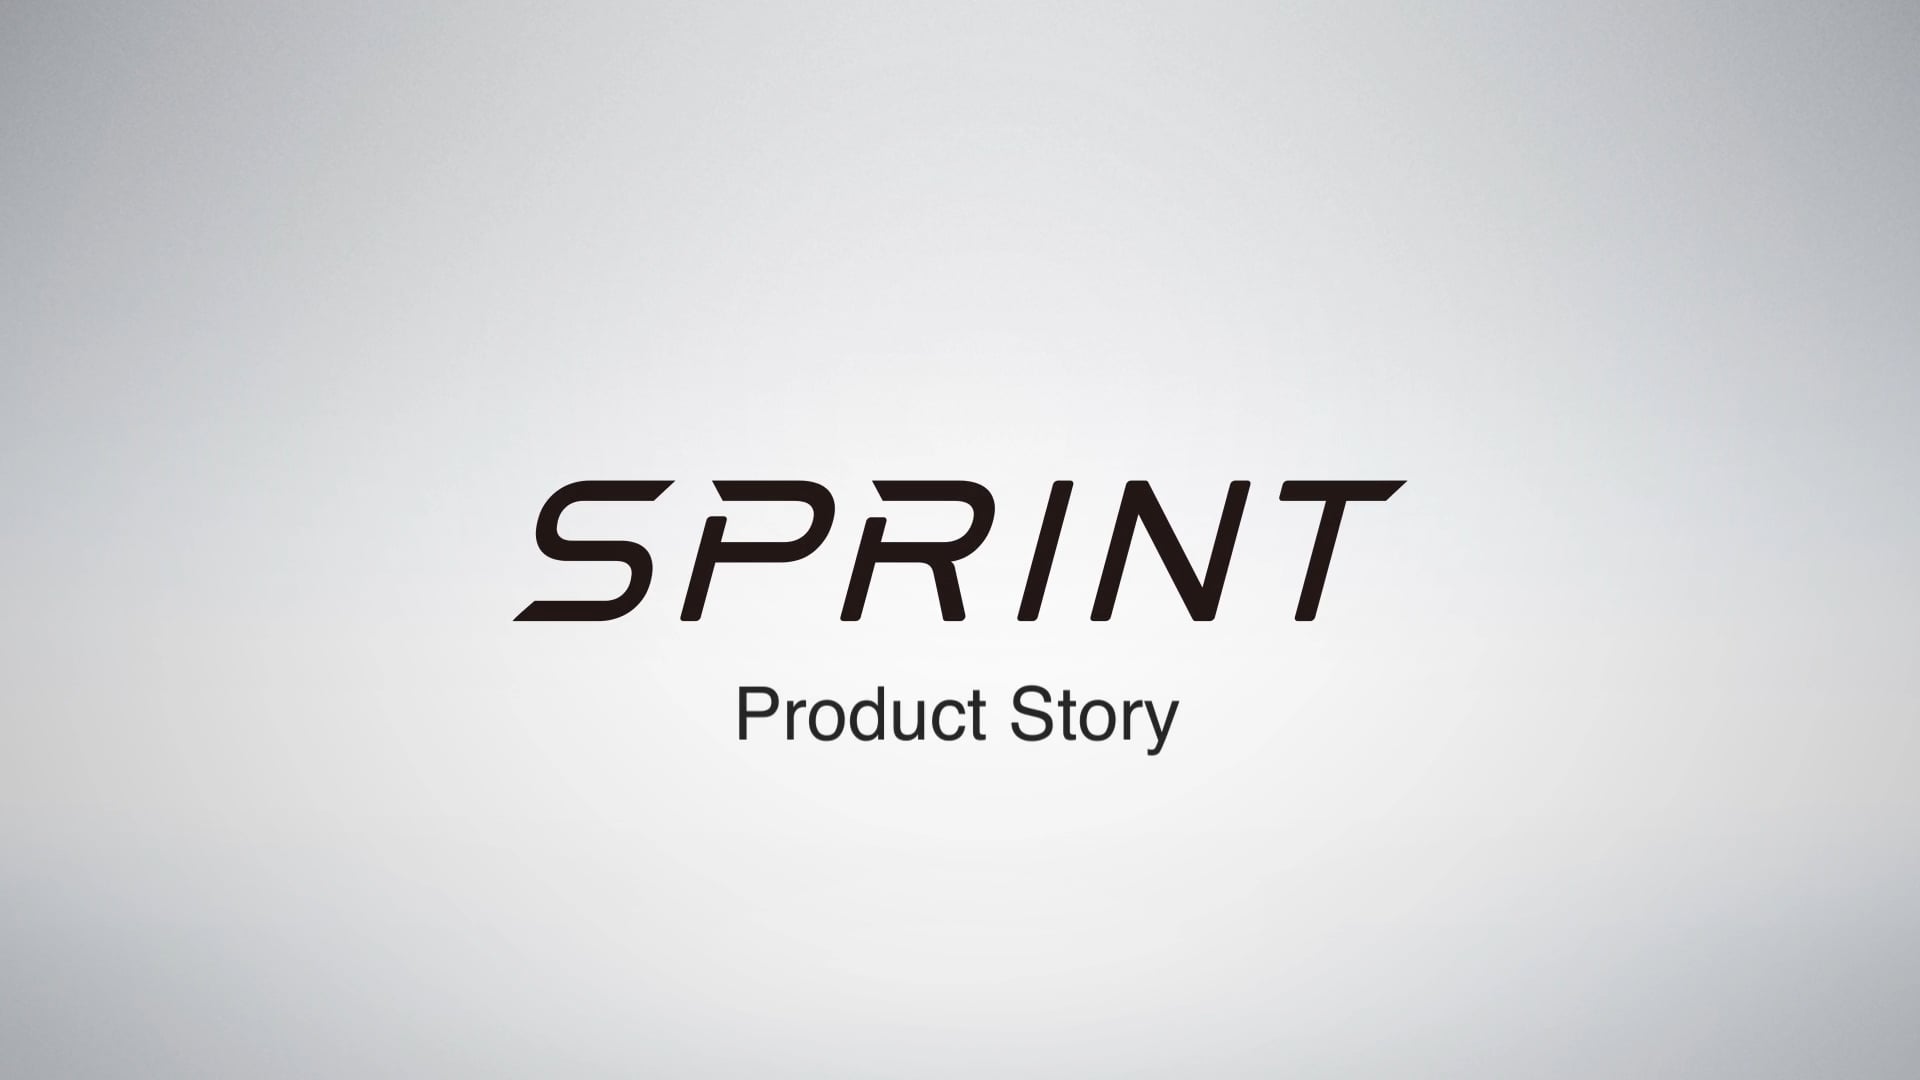 SPRINT Product Story